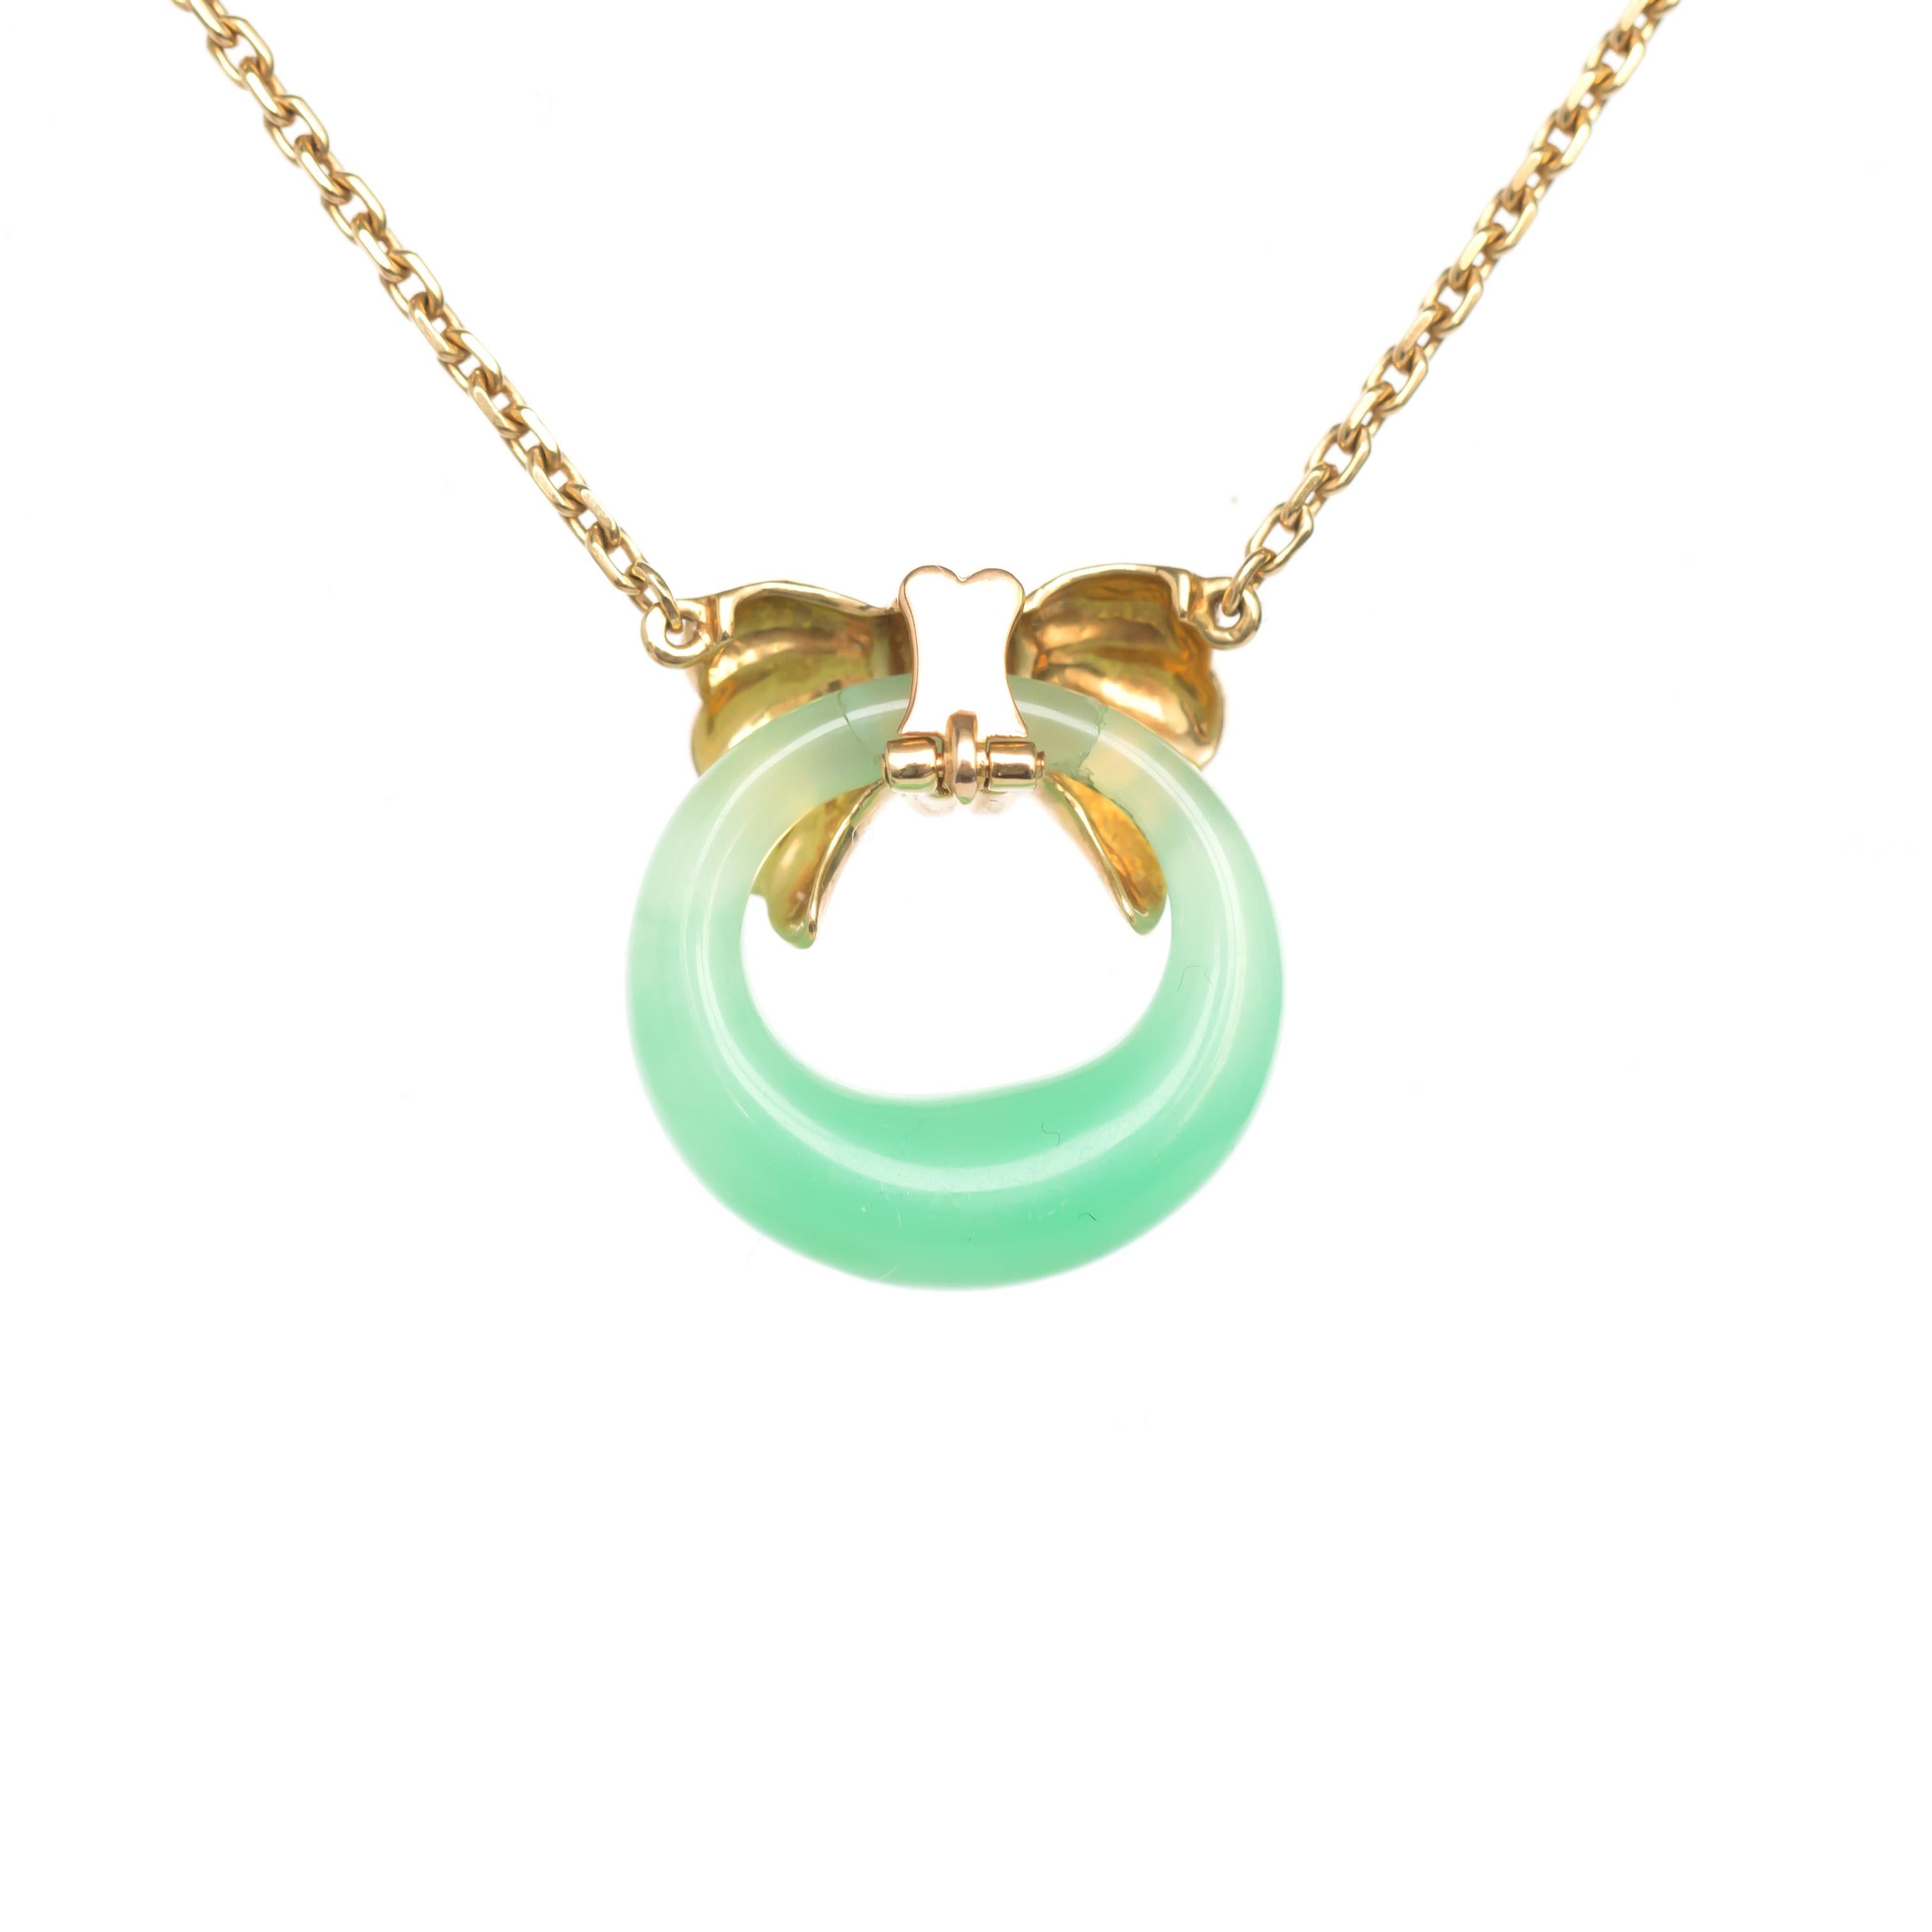 Retro Van Cleef and Arpels Yellow Gold Necklace